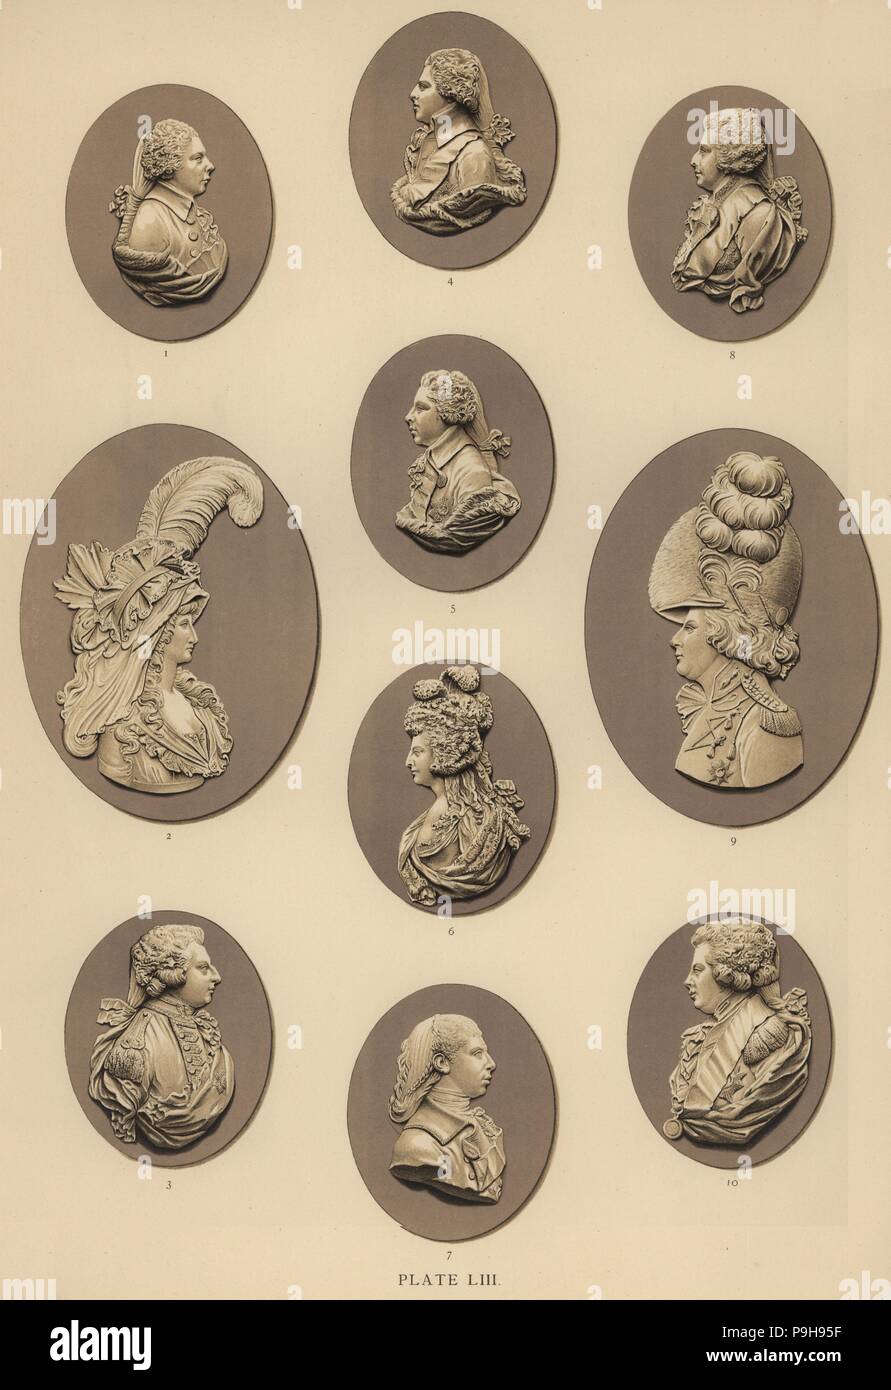 Portraits of the family of King George III: Prince Adolphus 1, Caroline Princess of Wales 2, Prince Frederick 3, Prince Ernest 4, Prince Augustus 5, Princess Charlotte 6, Prince Edward 7, Prince WIlliam Henry 8, Prince George, Prince Regent 9,10. Chromolithograph by W. Griggs from Frederick Rathbone's Old Wedgwood, the Decorative or Artistic Ceramic Work Produced by Josiah Wedgwood, Quaritch, London, 1898. Stock Photo